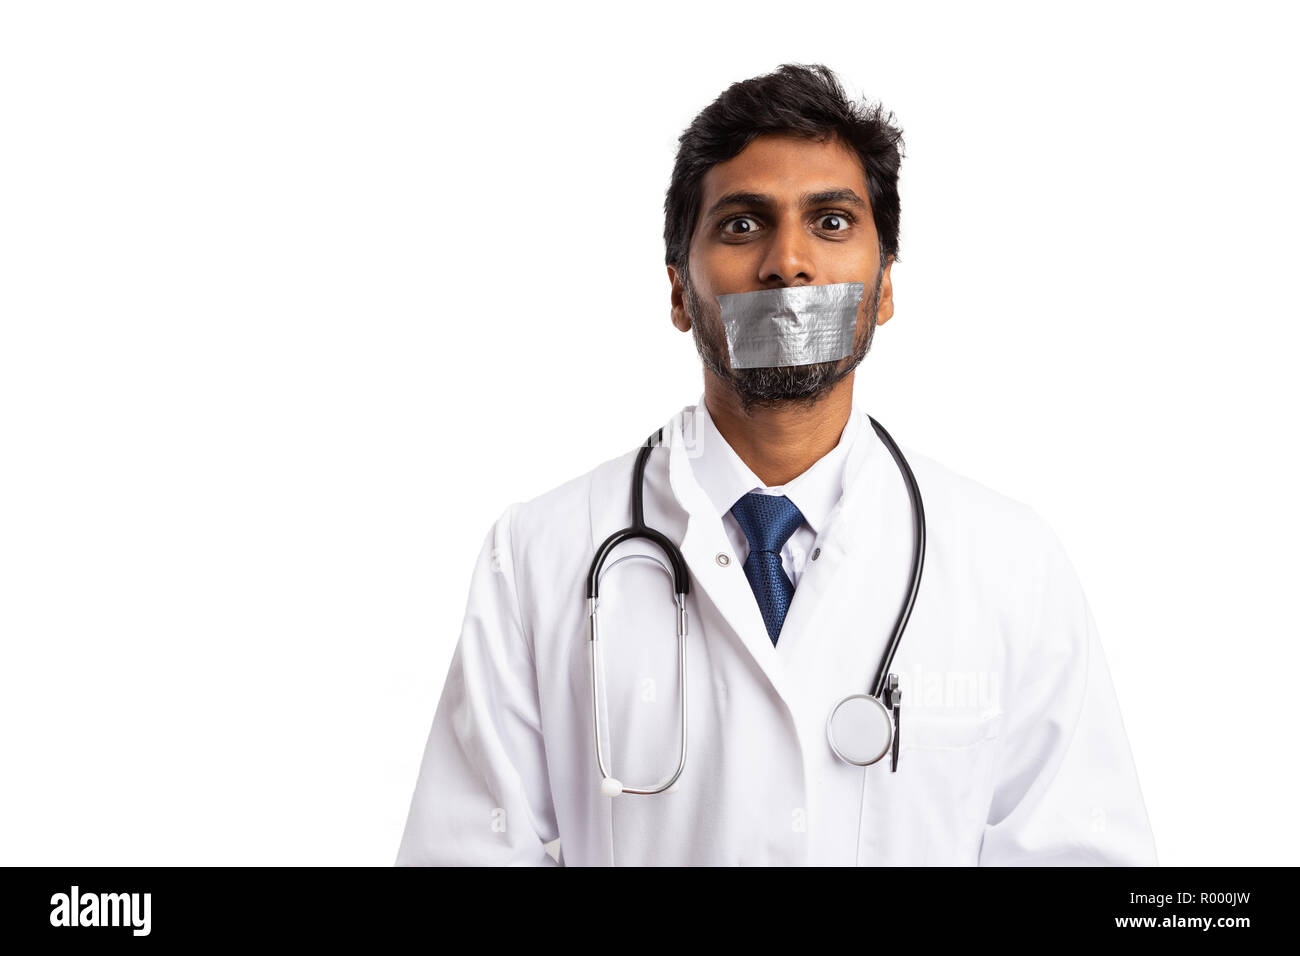 Indian doctor with duct taped mouth as professional secret concept isolated on white background Stock Photo